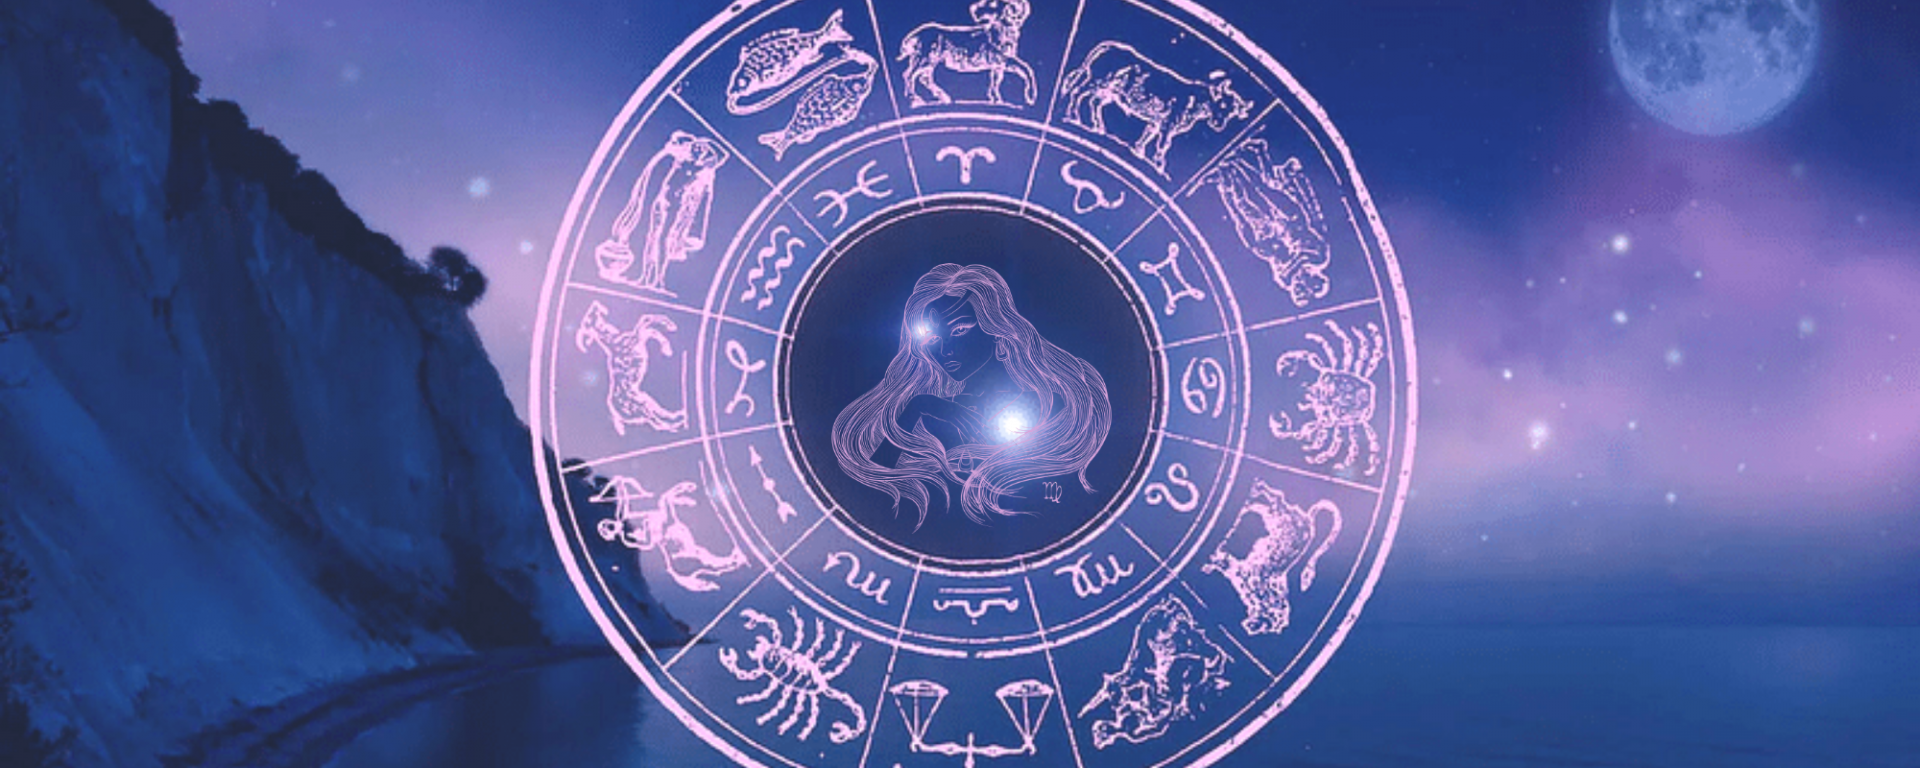 July 2022 Horoscope: Monthly Astrological Predictions for All 12 Zodiac Signs